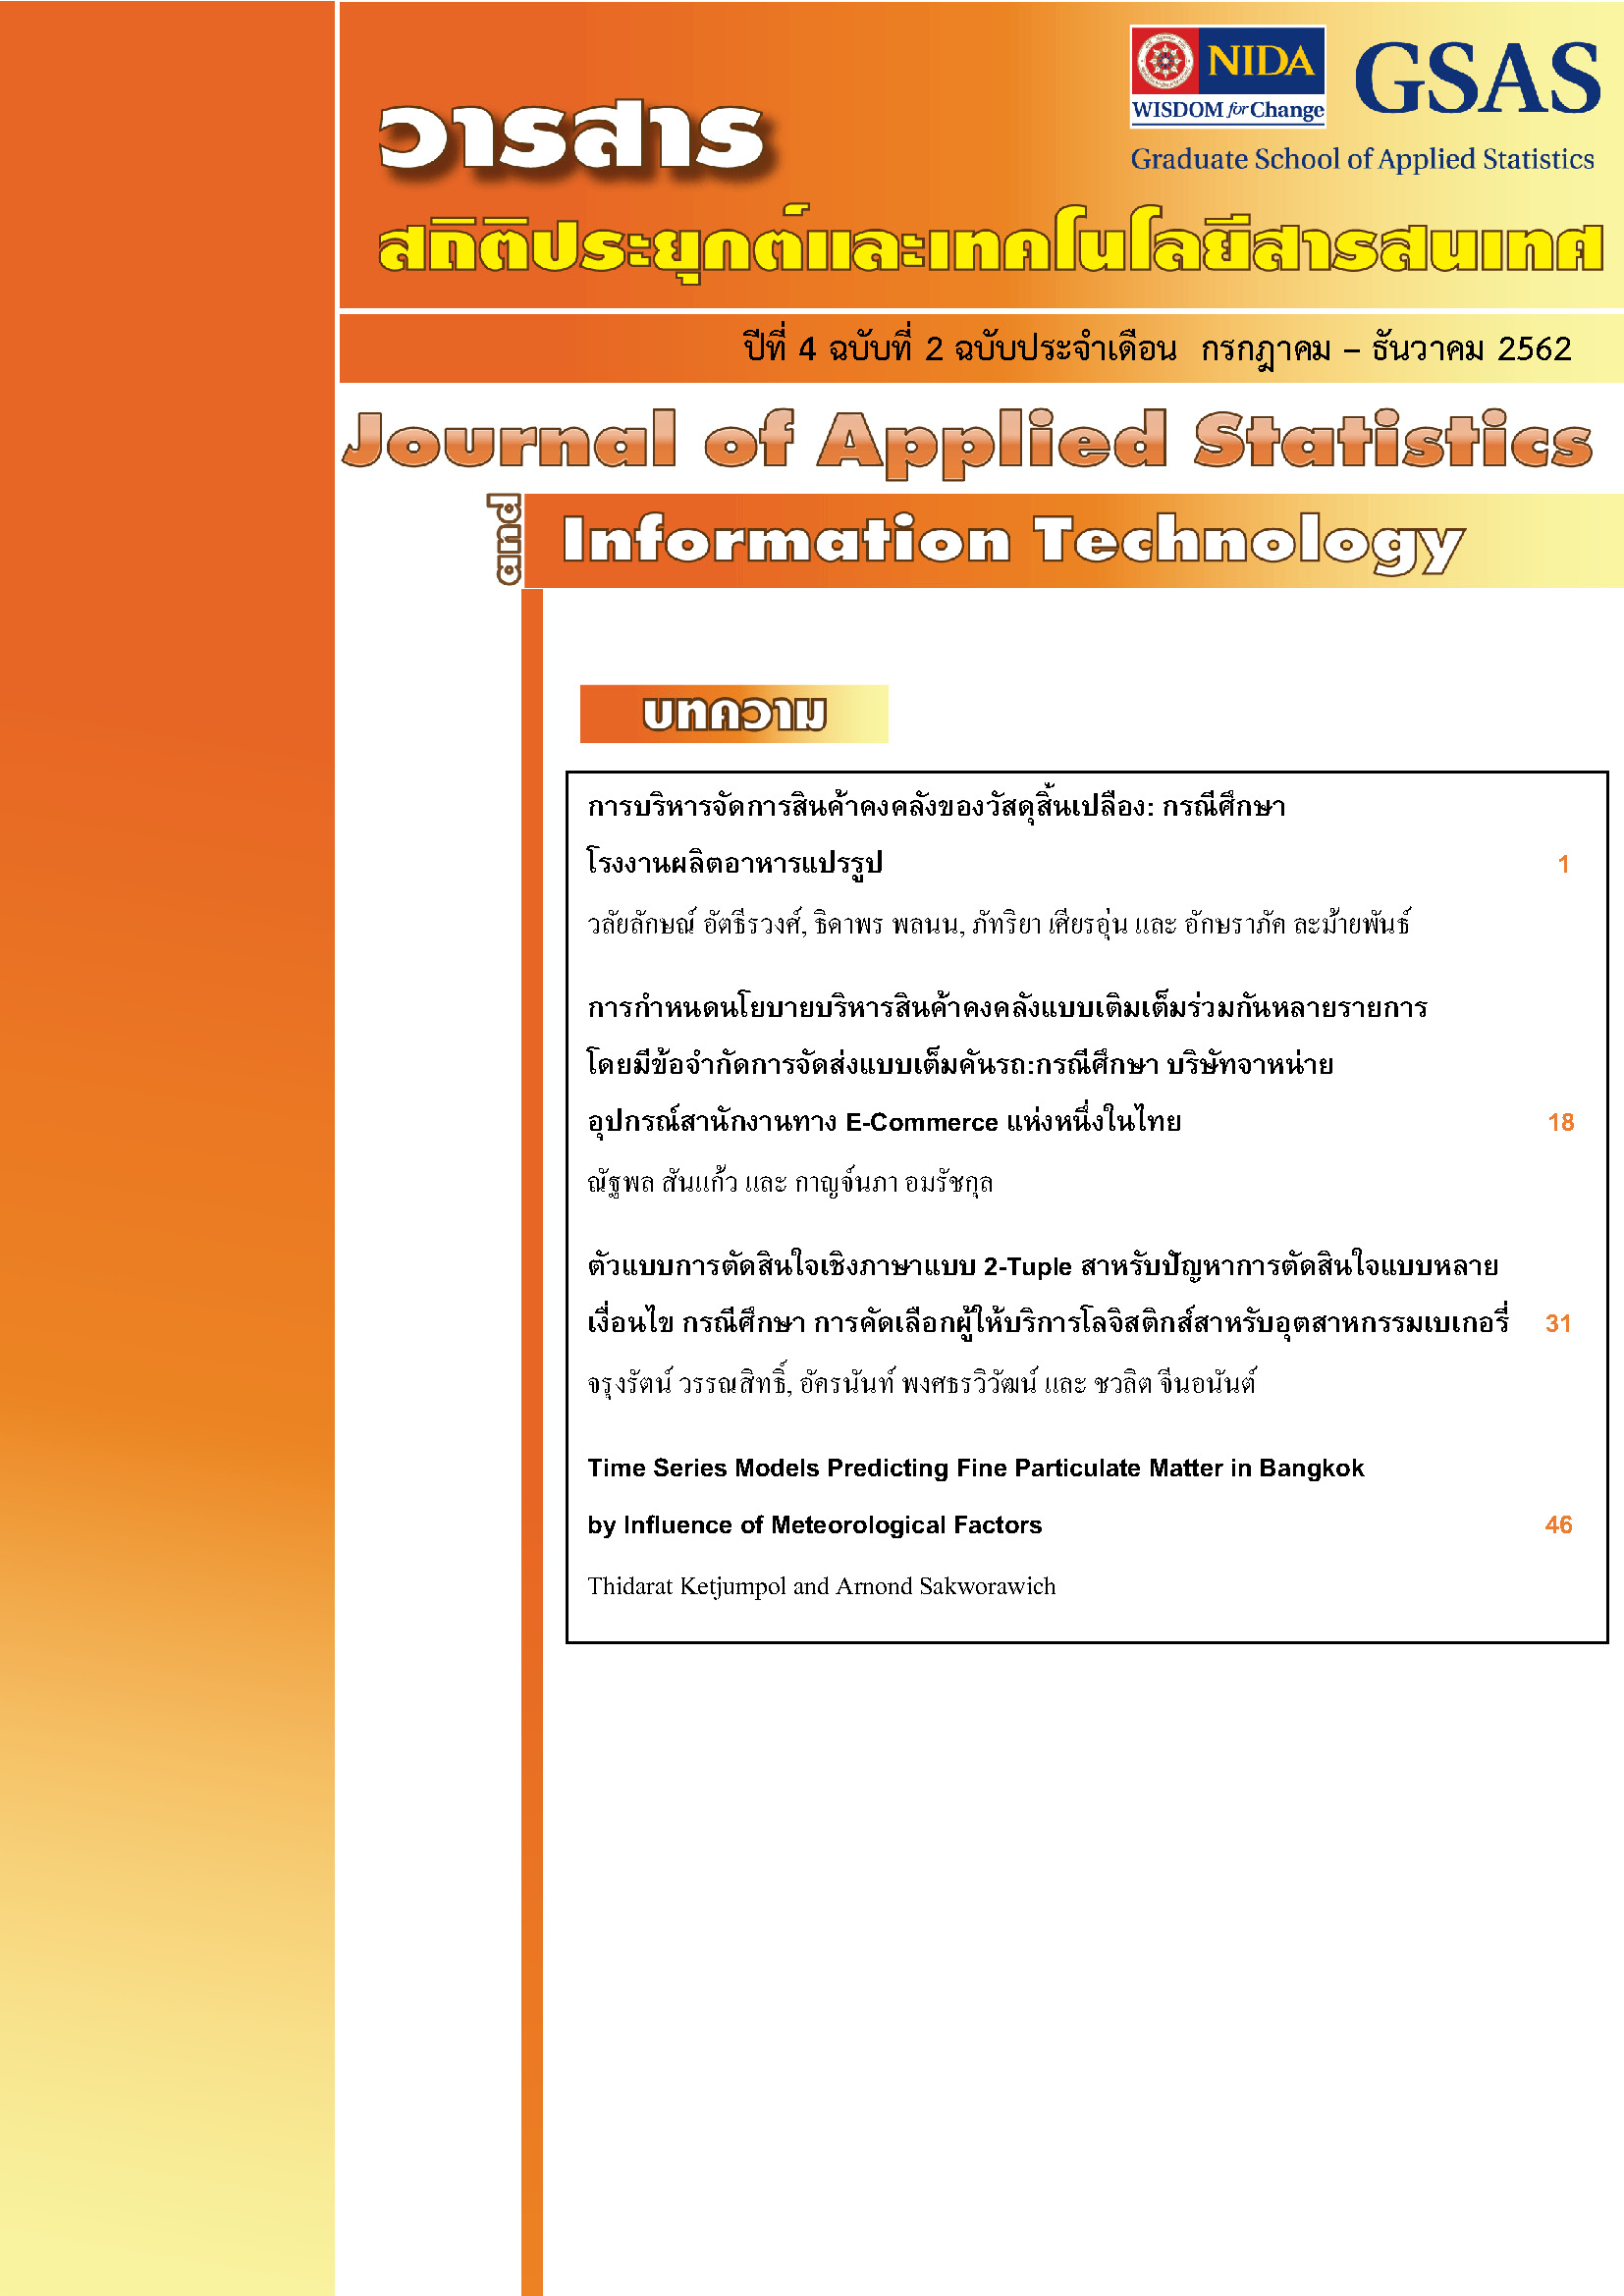 					View Vol. 4 No. 2 (2019): Journal of Applied Statistics and Information Technology Vol 4 No 2 (July - December 2019)
				